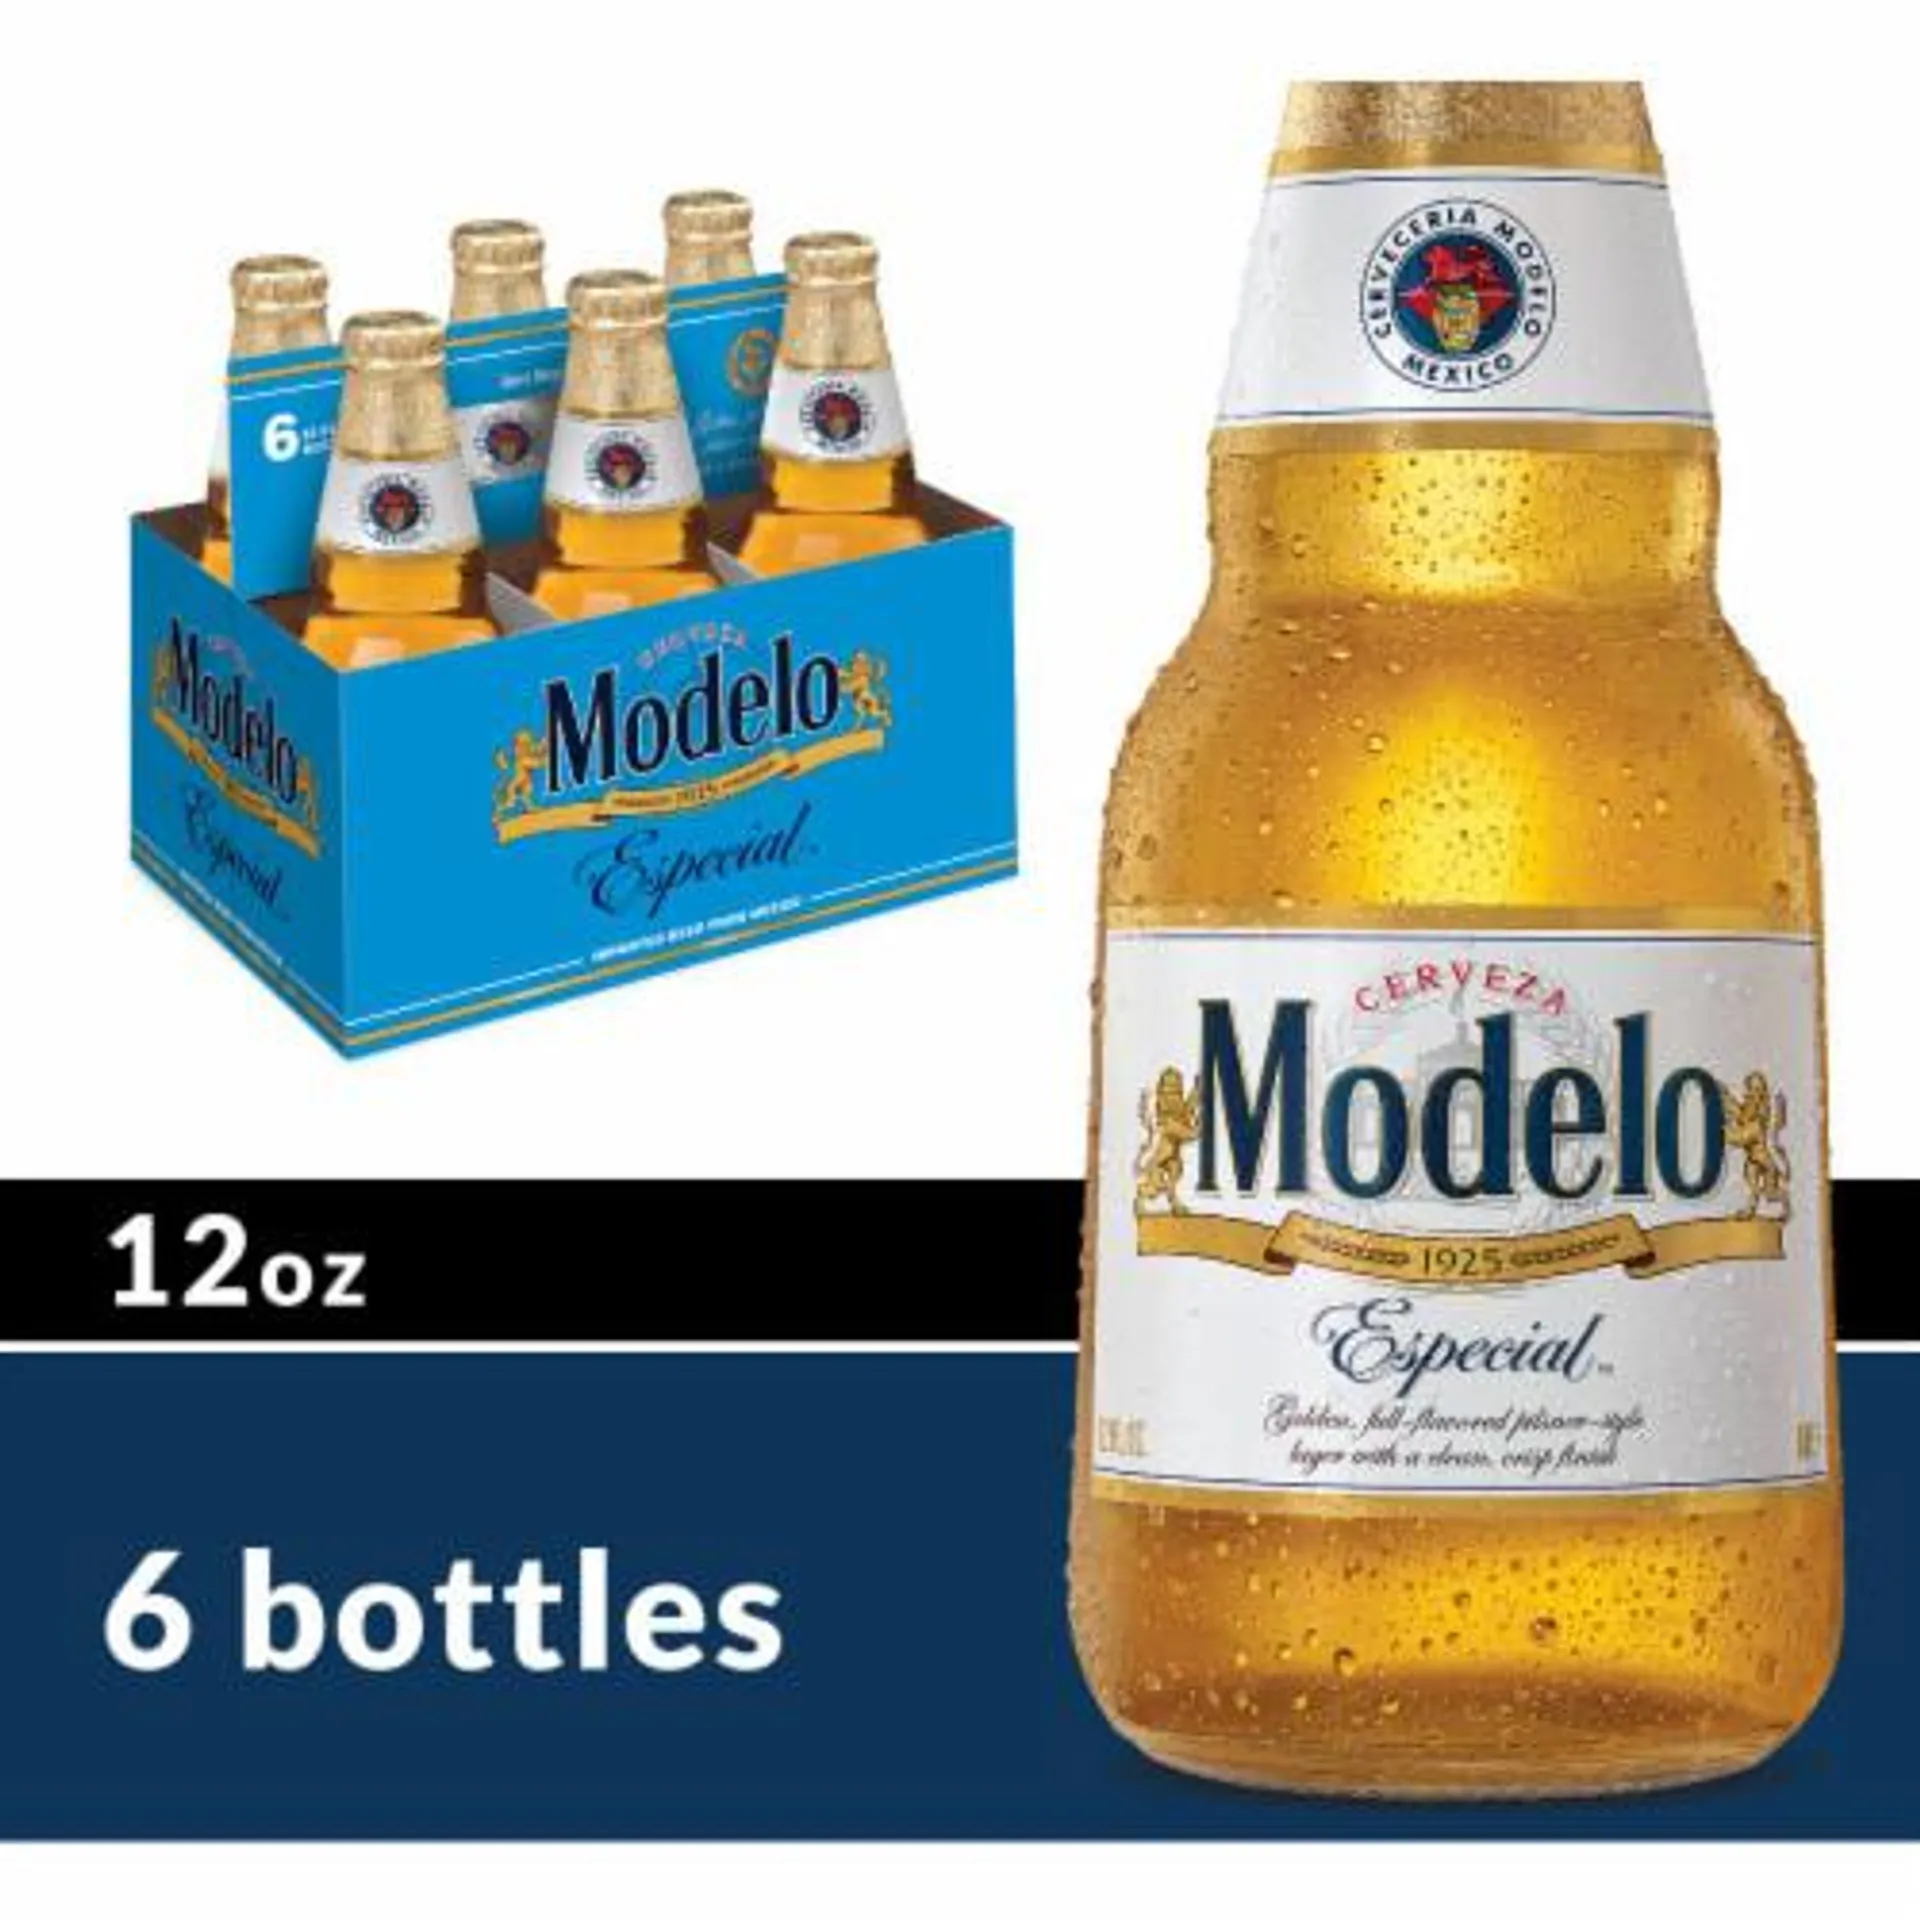 Modelo Especial Mexican Lager Import Beer